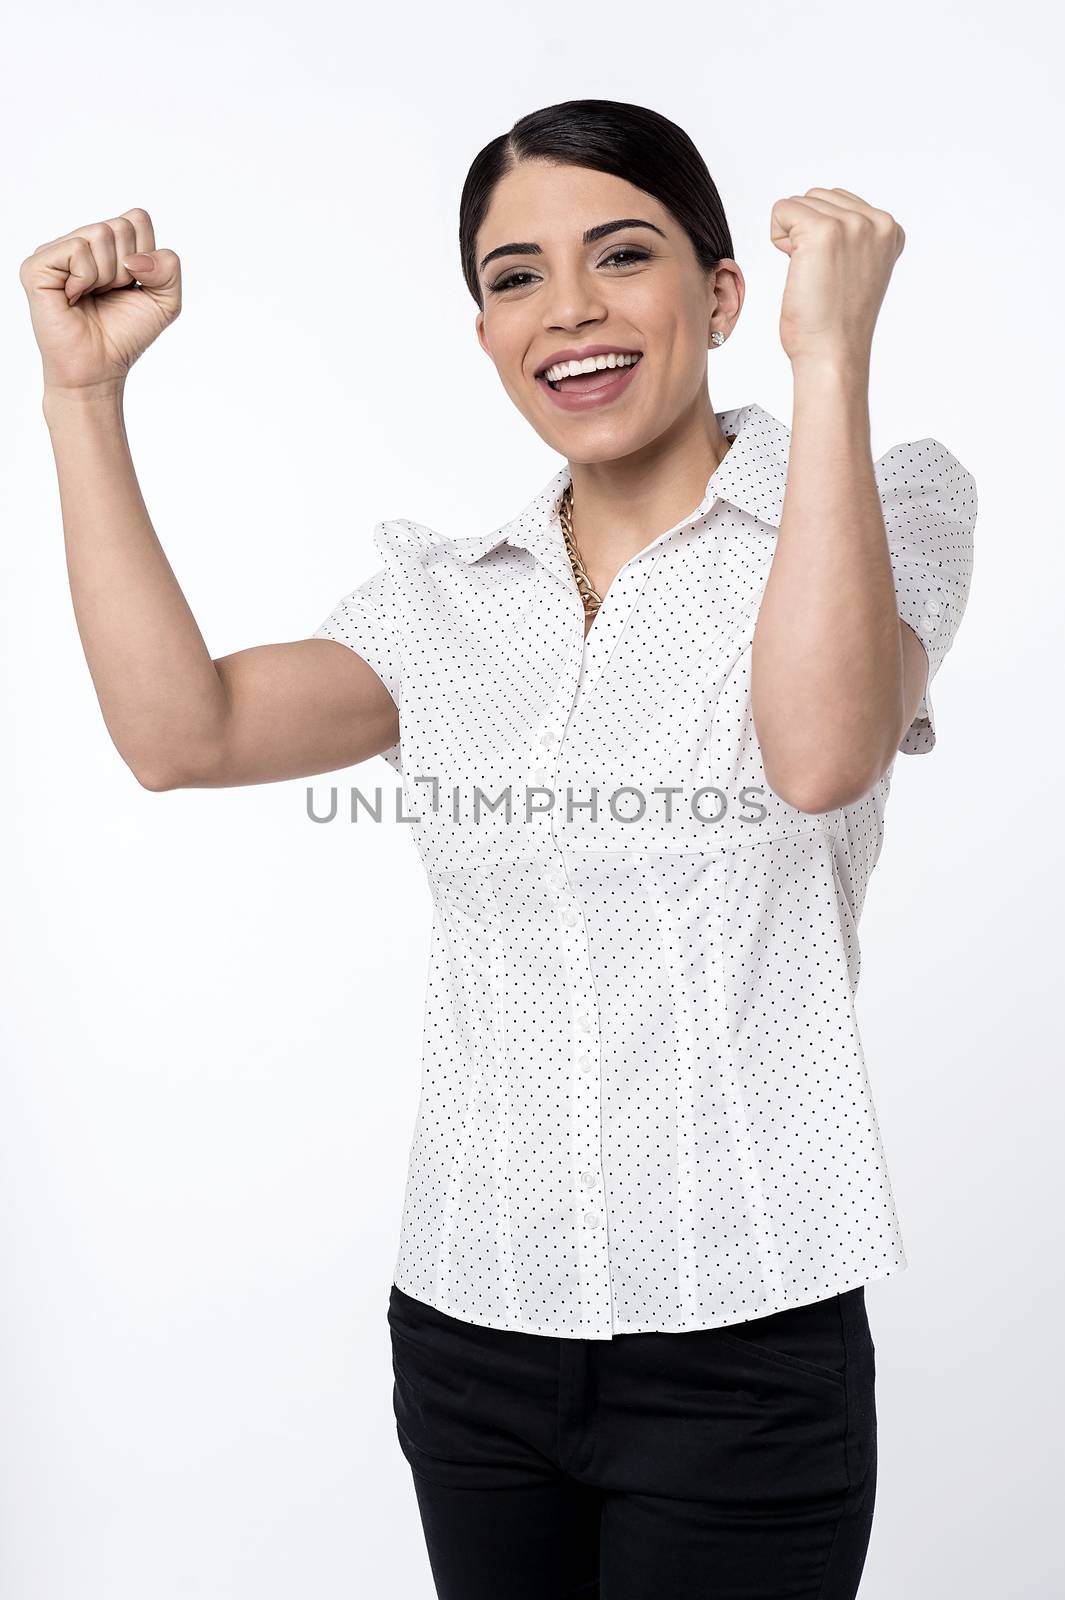 Happy woman celebrating with arms up joy of winning